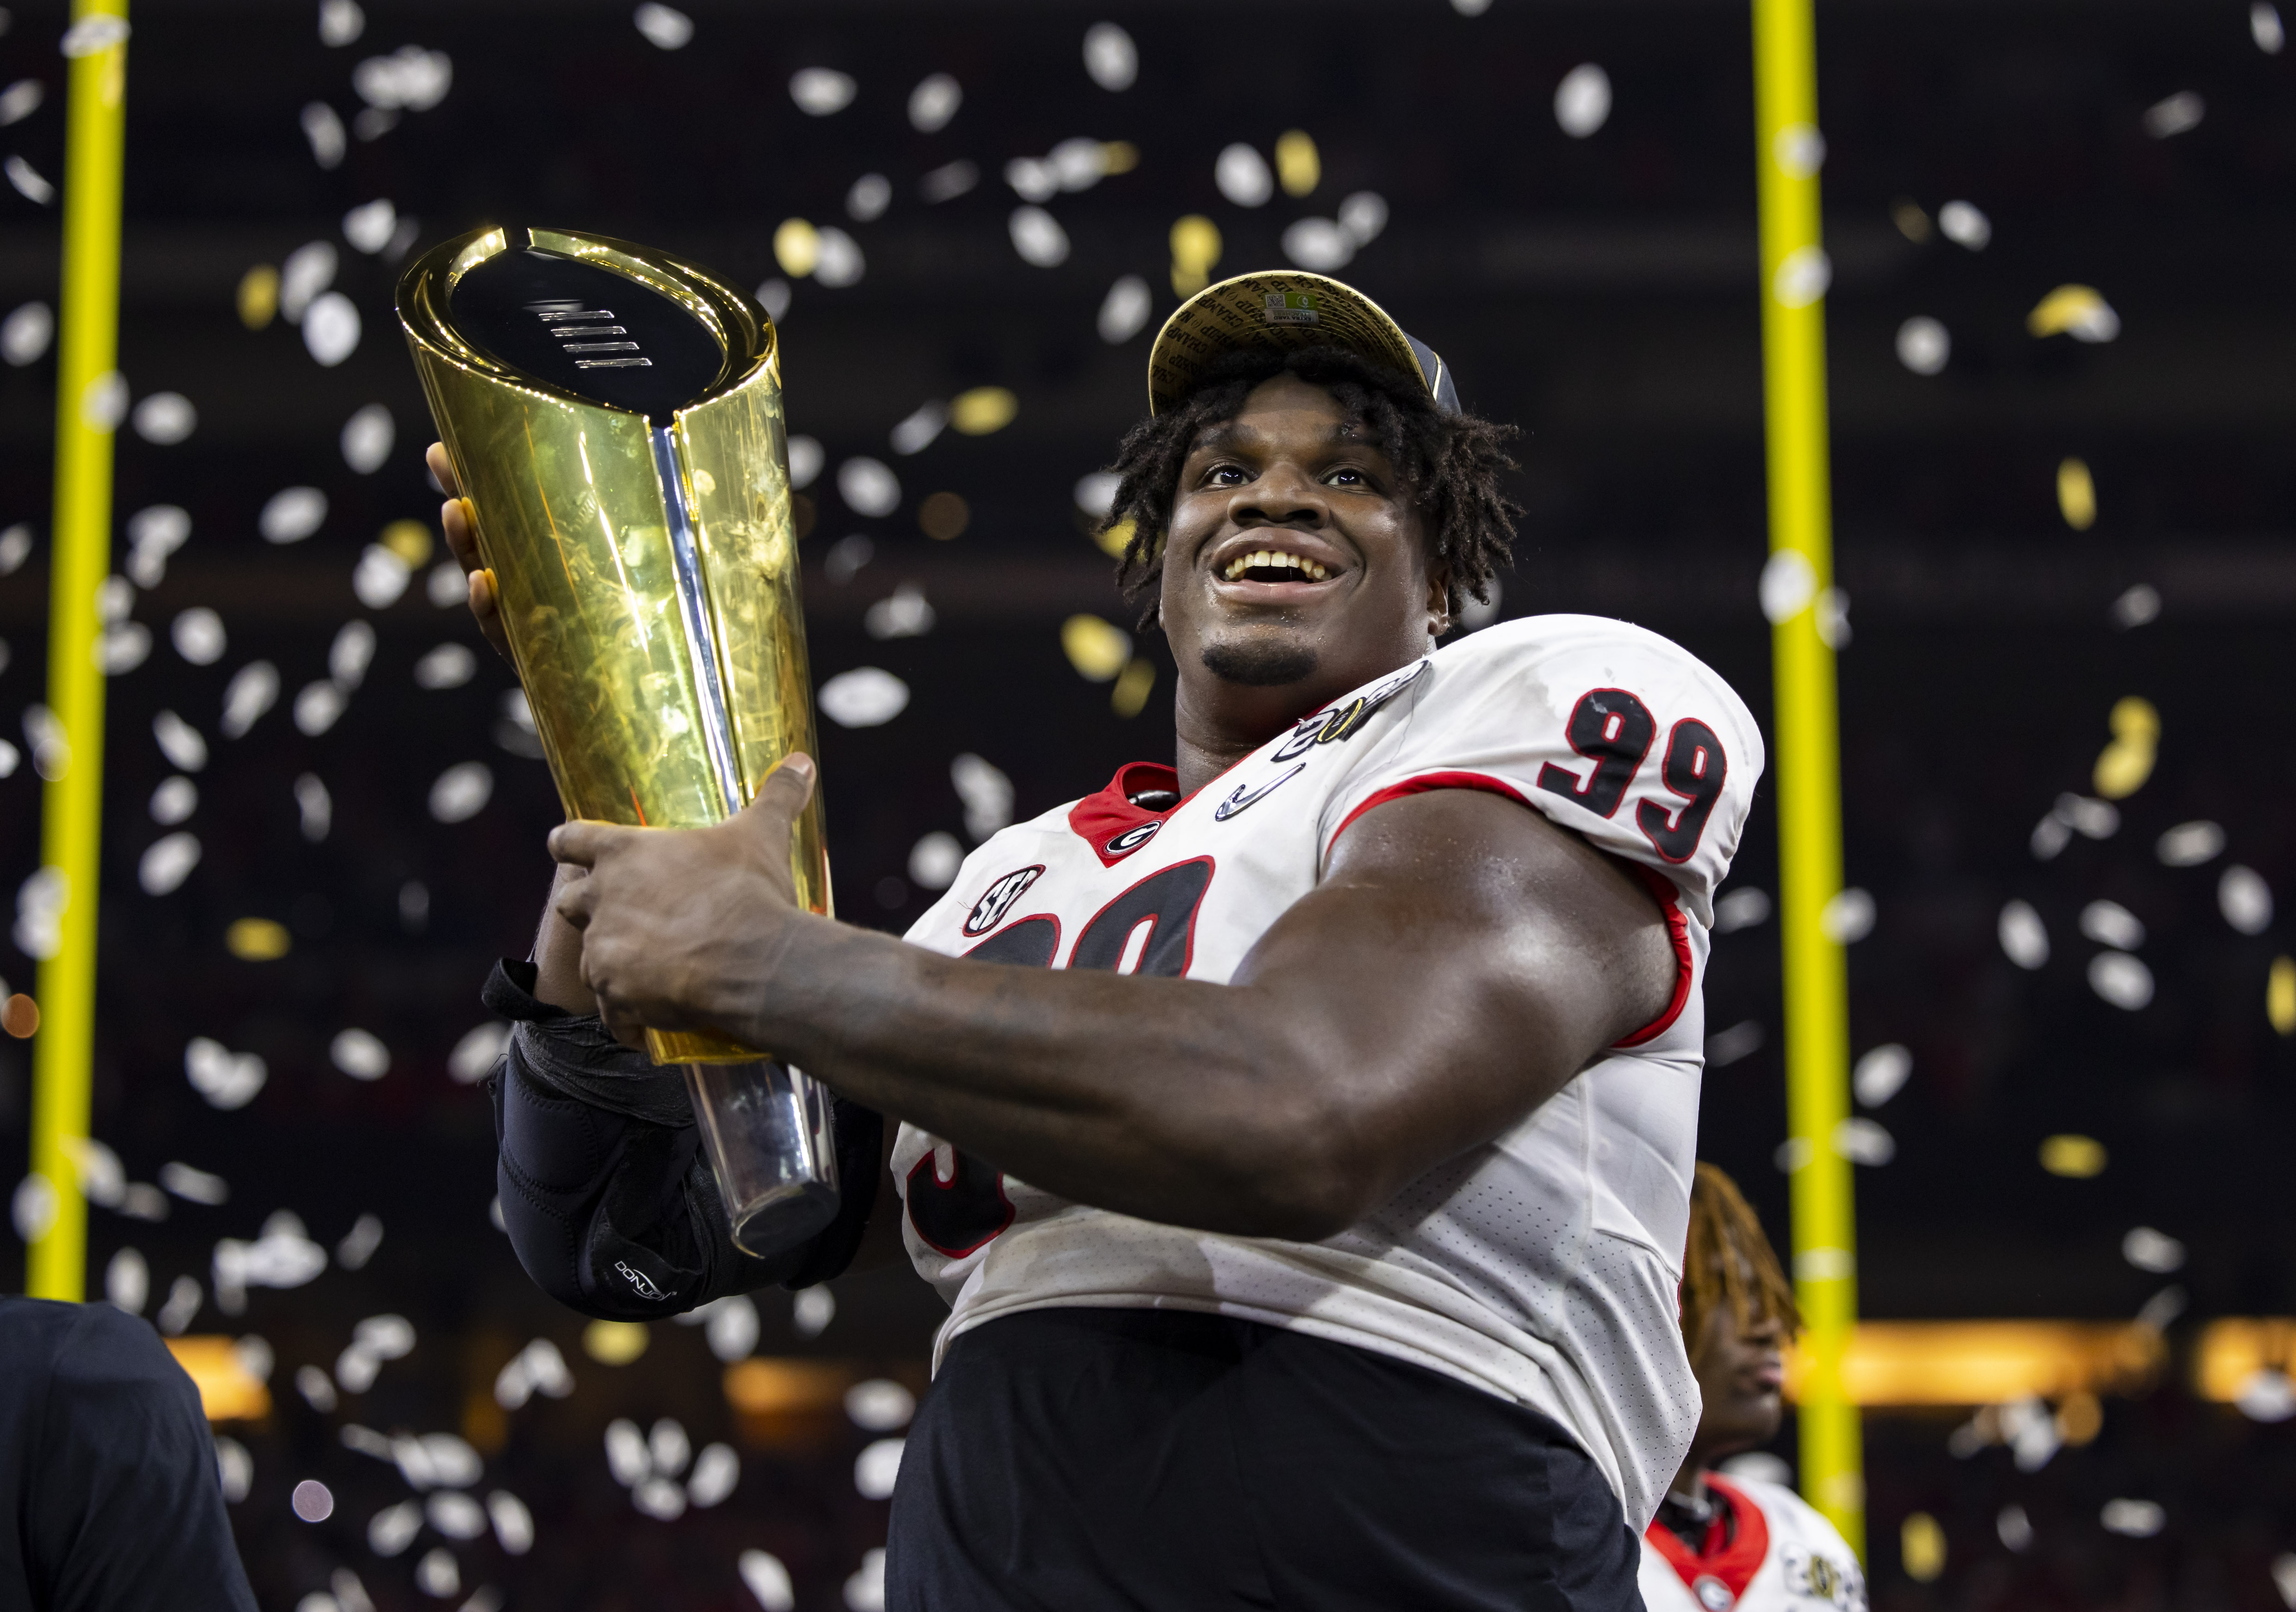 Georgia Bulldogs defensive lineman Jordan Davis (99) celebrates with the championship trophy after defeating the Alabama Crimson Tide in the 2022 CFP college football national championship game at Lucas Oil Stadium.